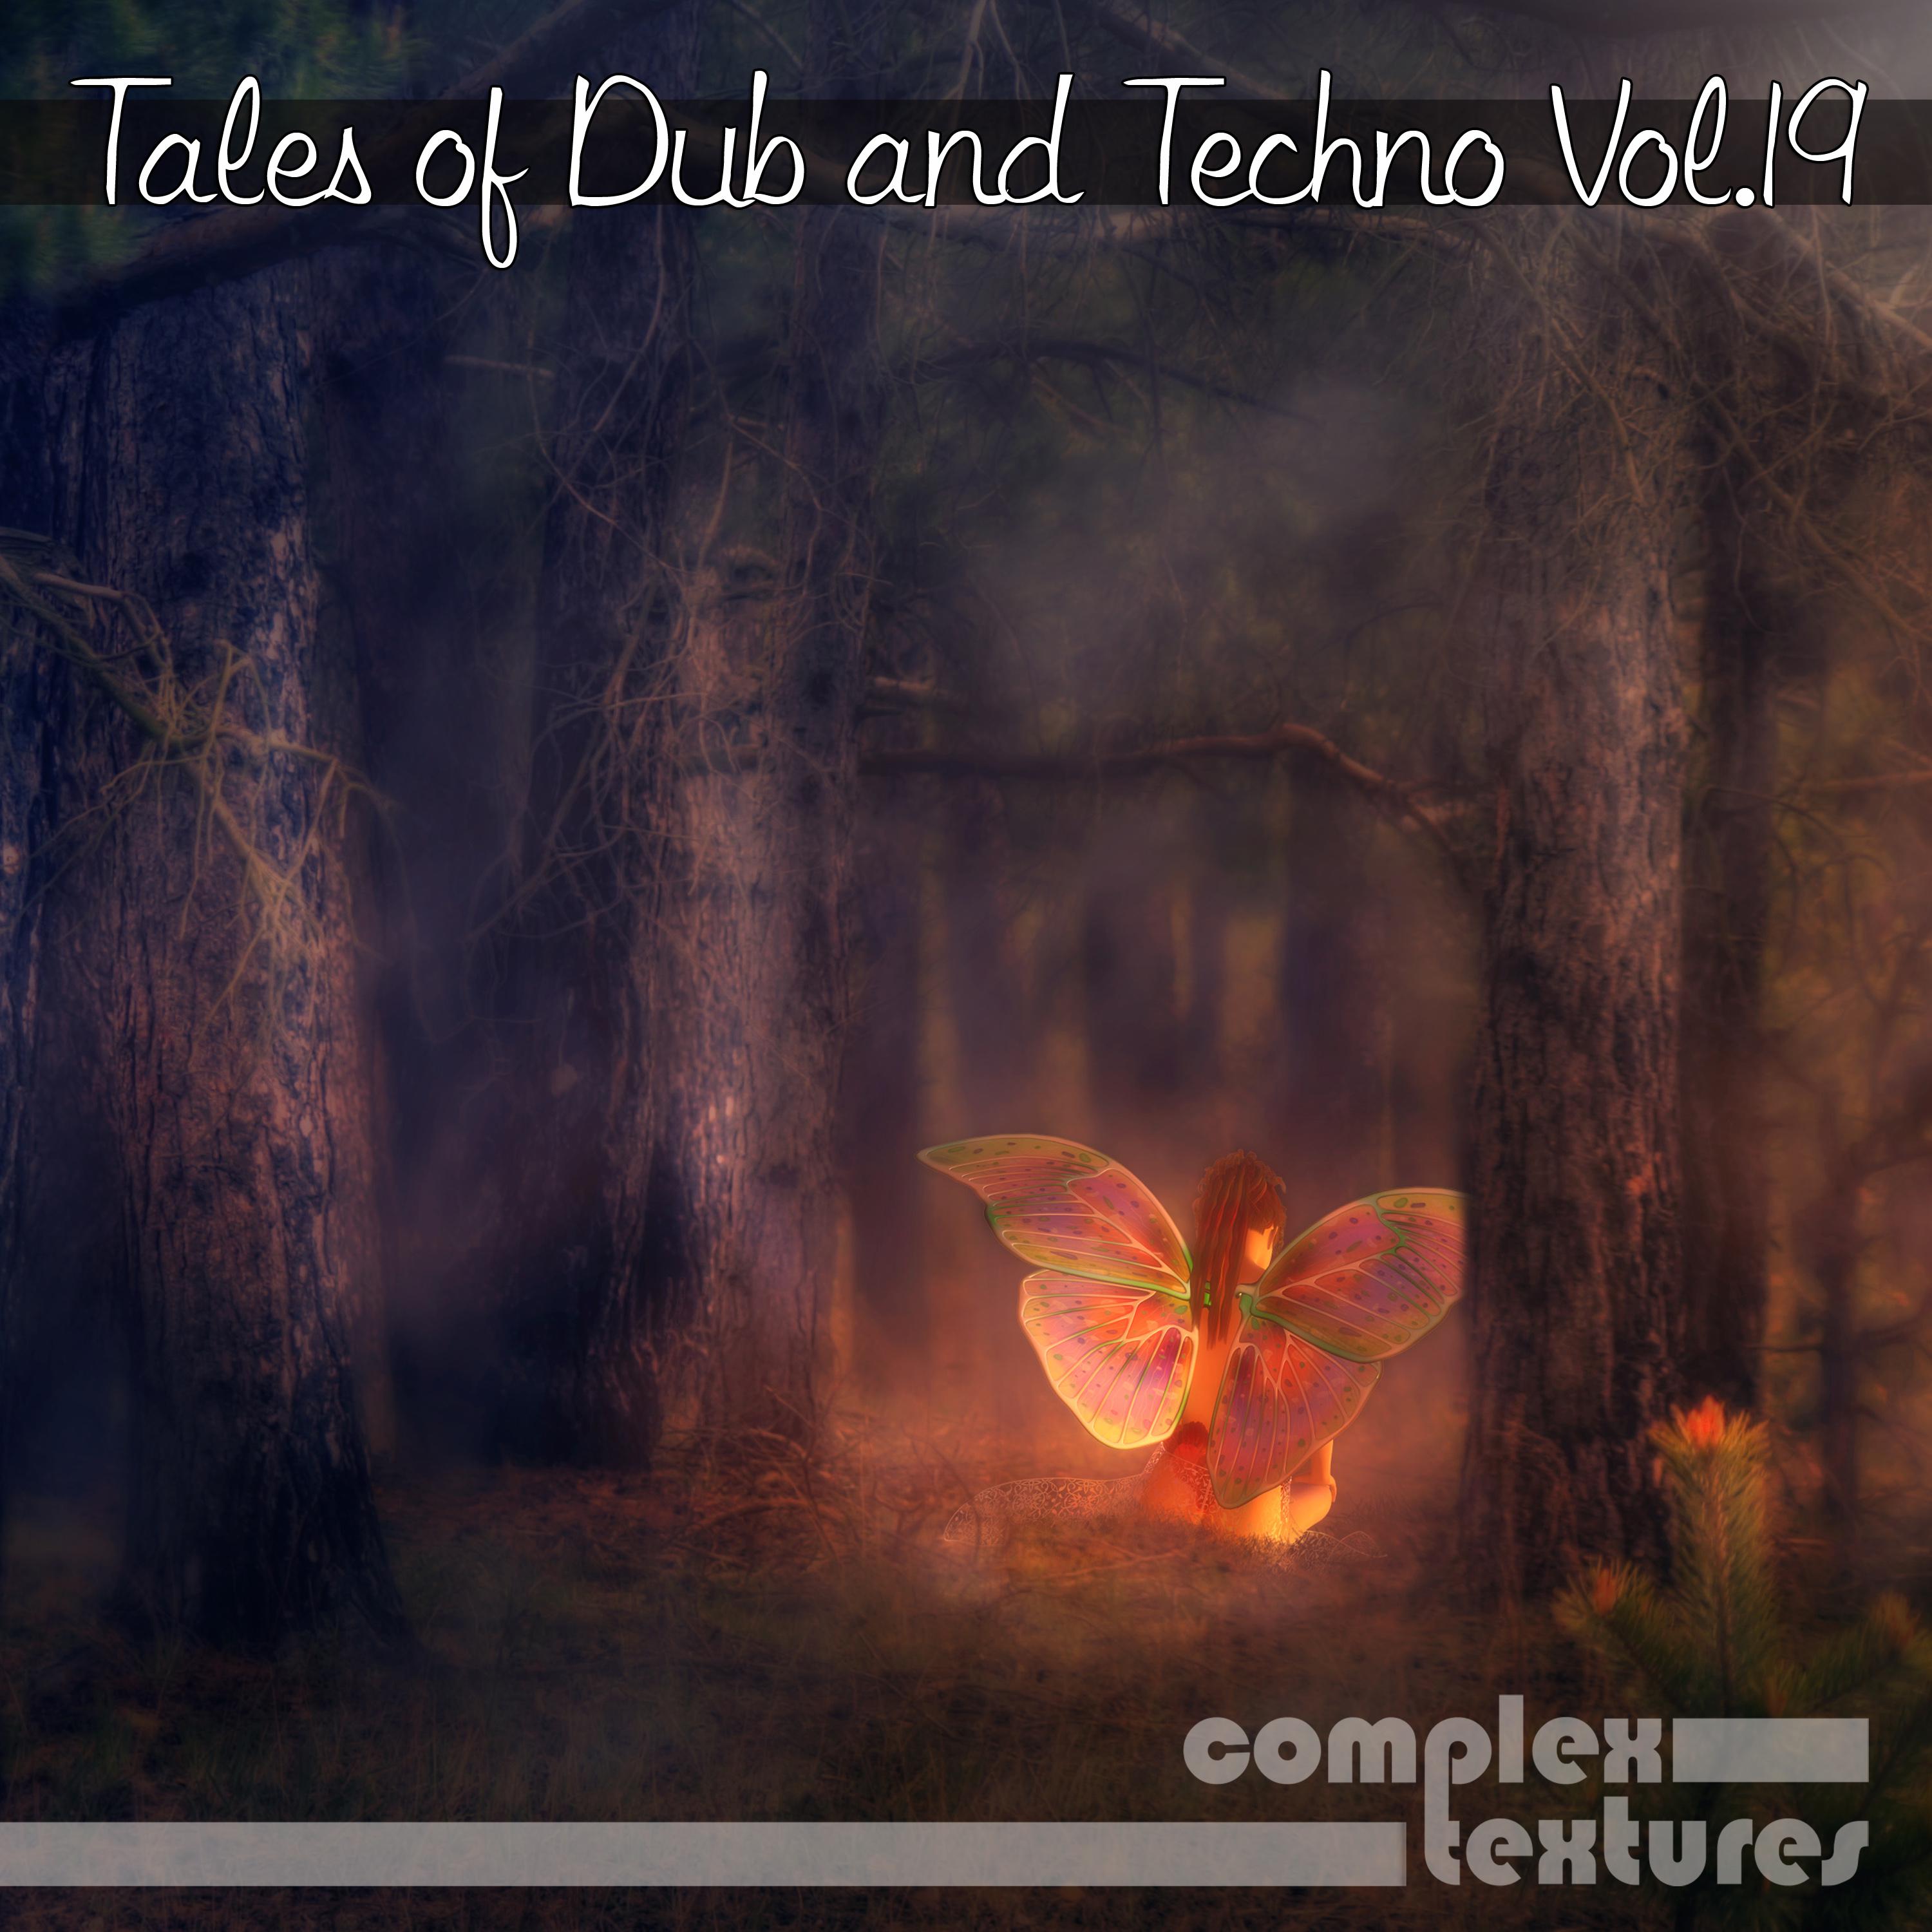 Tales of Dub and Techno, Vol. 19